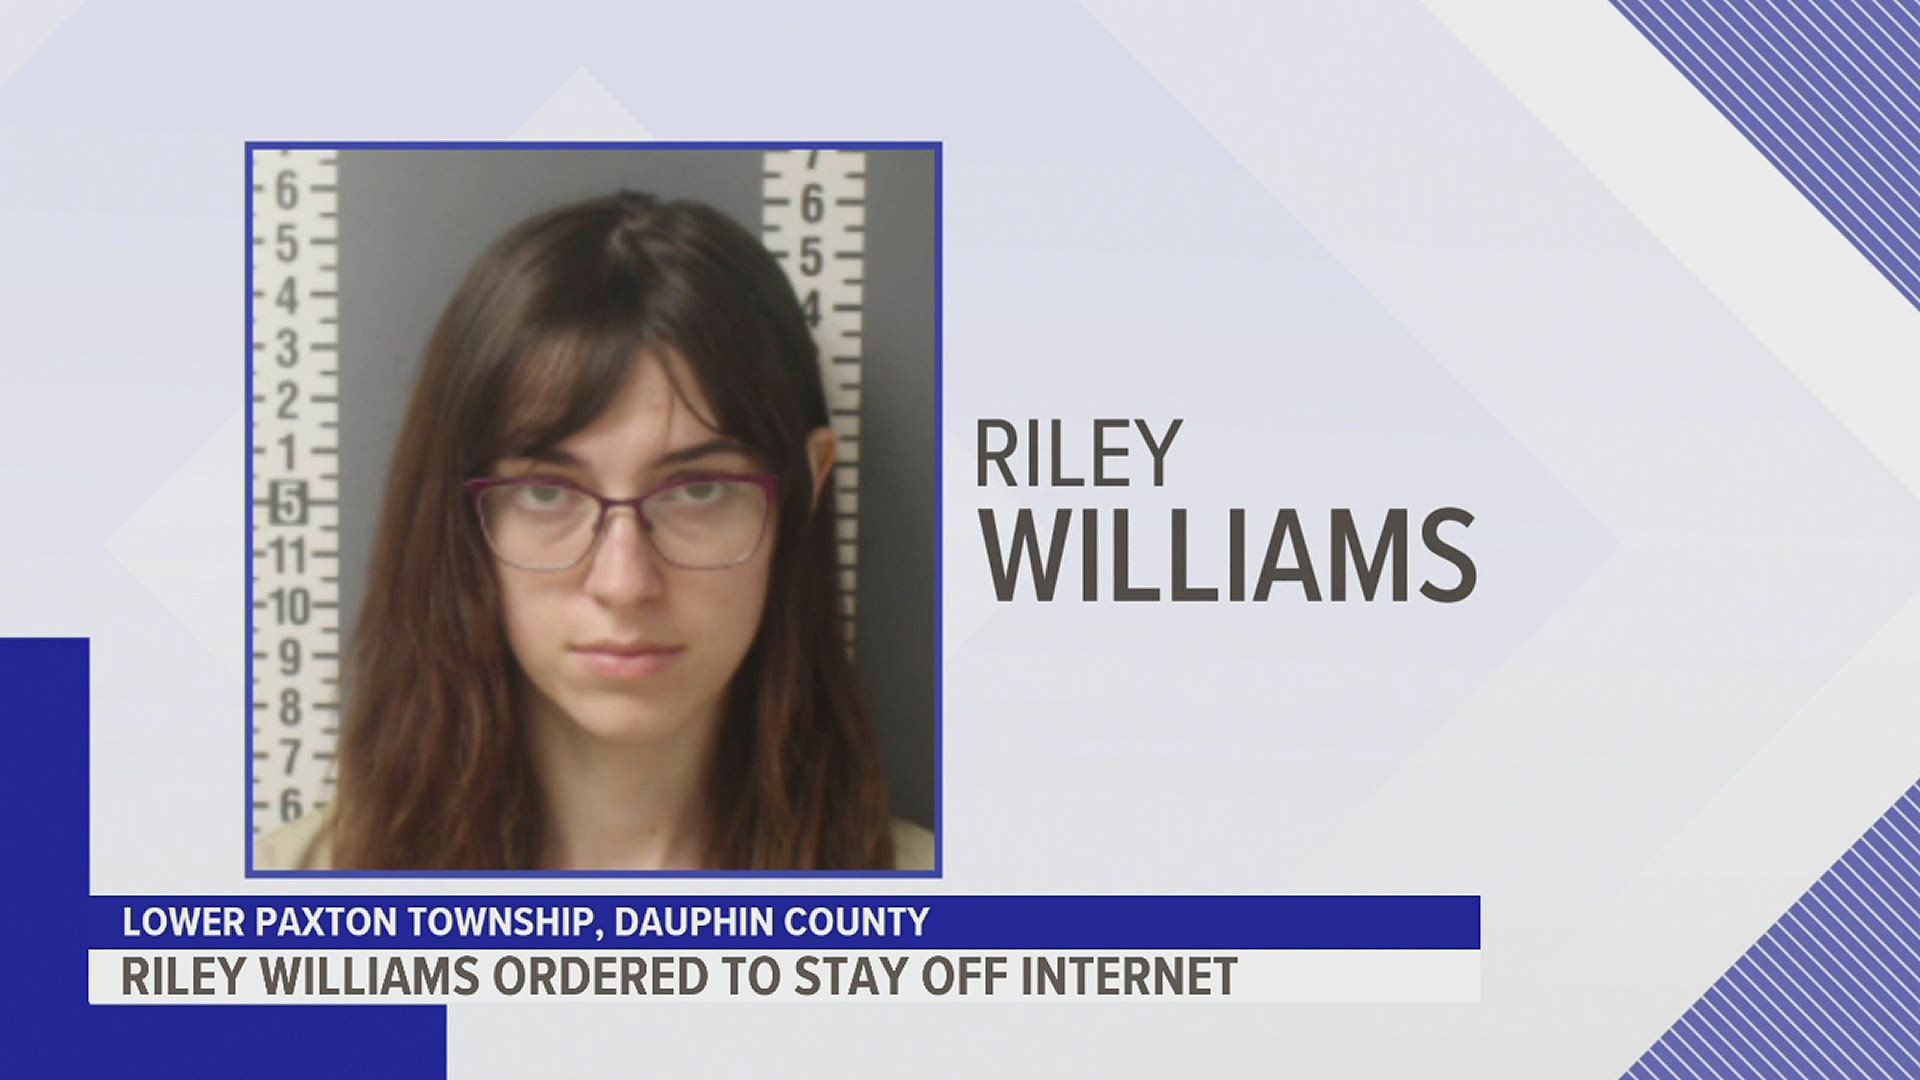 A federal judge on Jan. 26 imposed new restrictions on Riley Williams, the 22-year-old Harrisburg woman accused of stealing U.S. House Speaker Nancy Pelosi’s laptop.